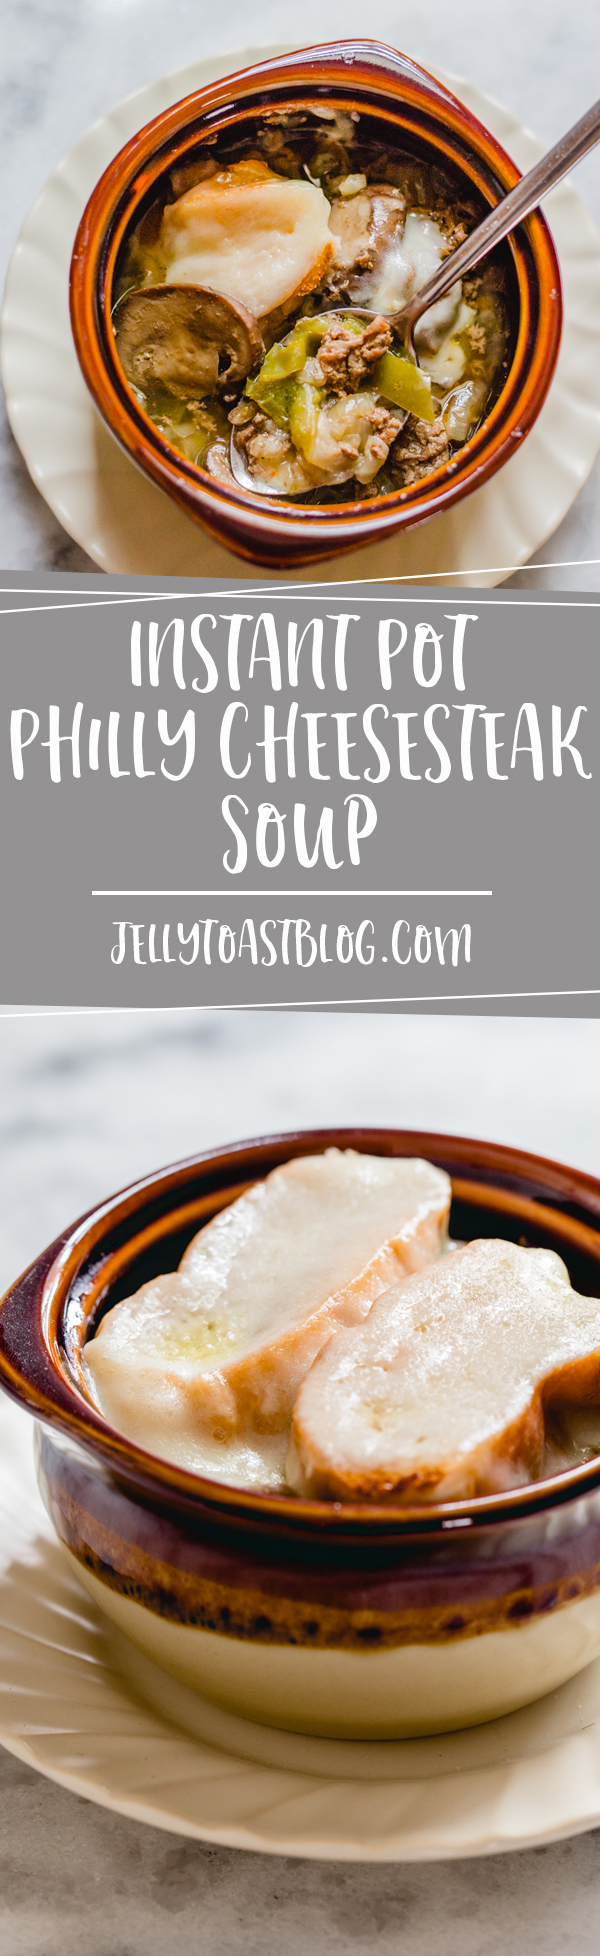 Instant Pot Philly Cheesesteak Soup